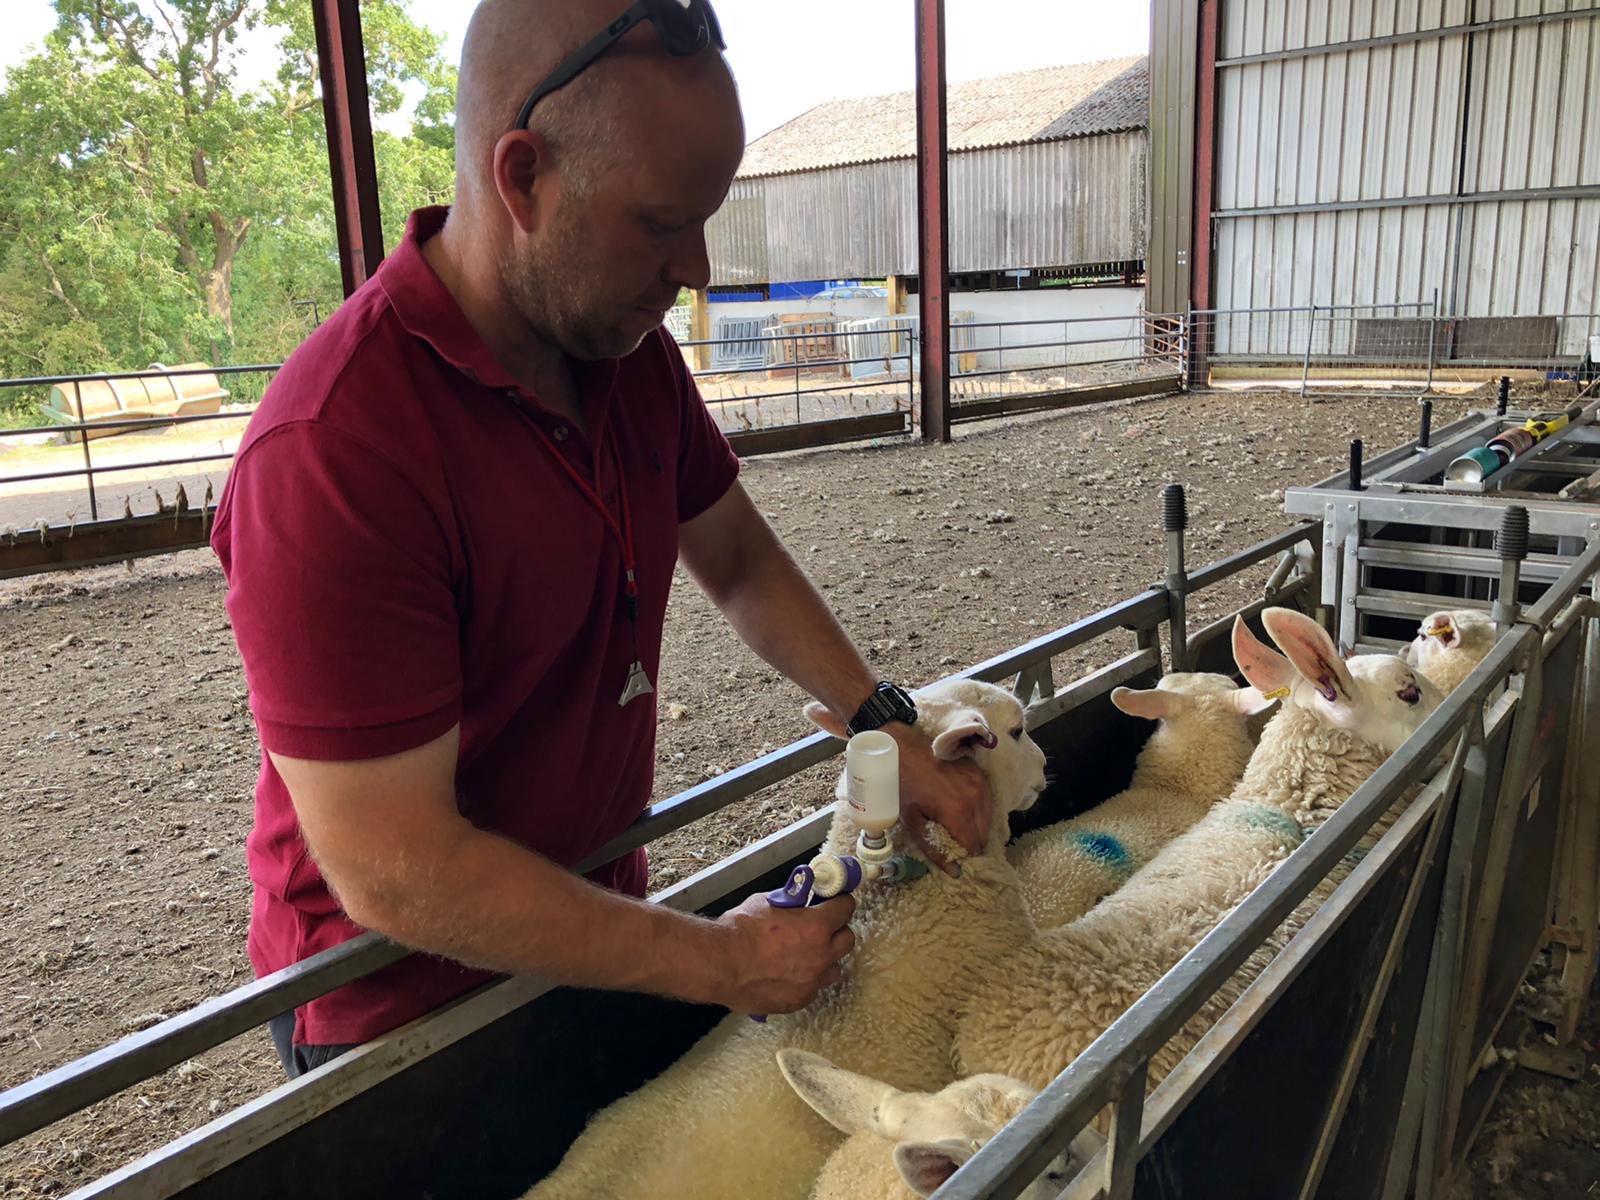 Sheep being vaccinated. Image courtesy and copyright of Chris Elkington.